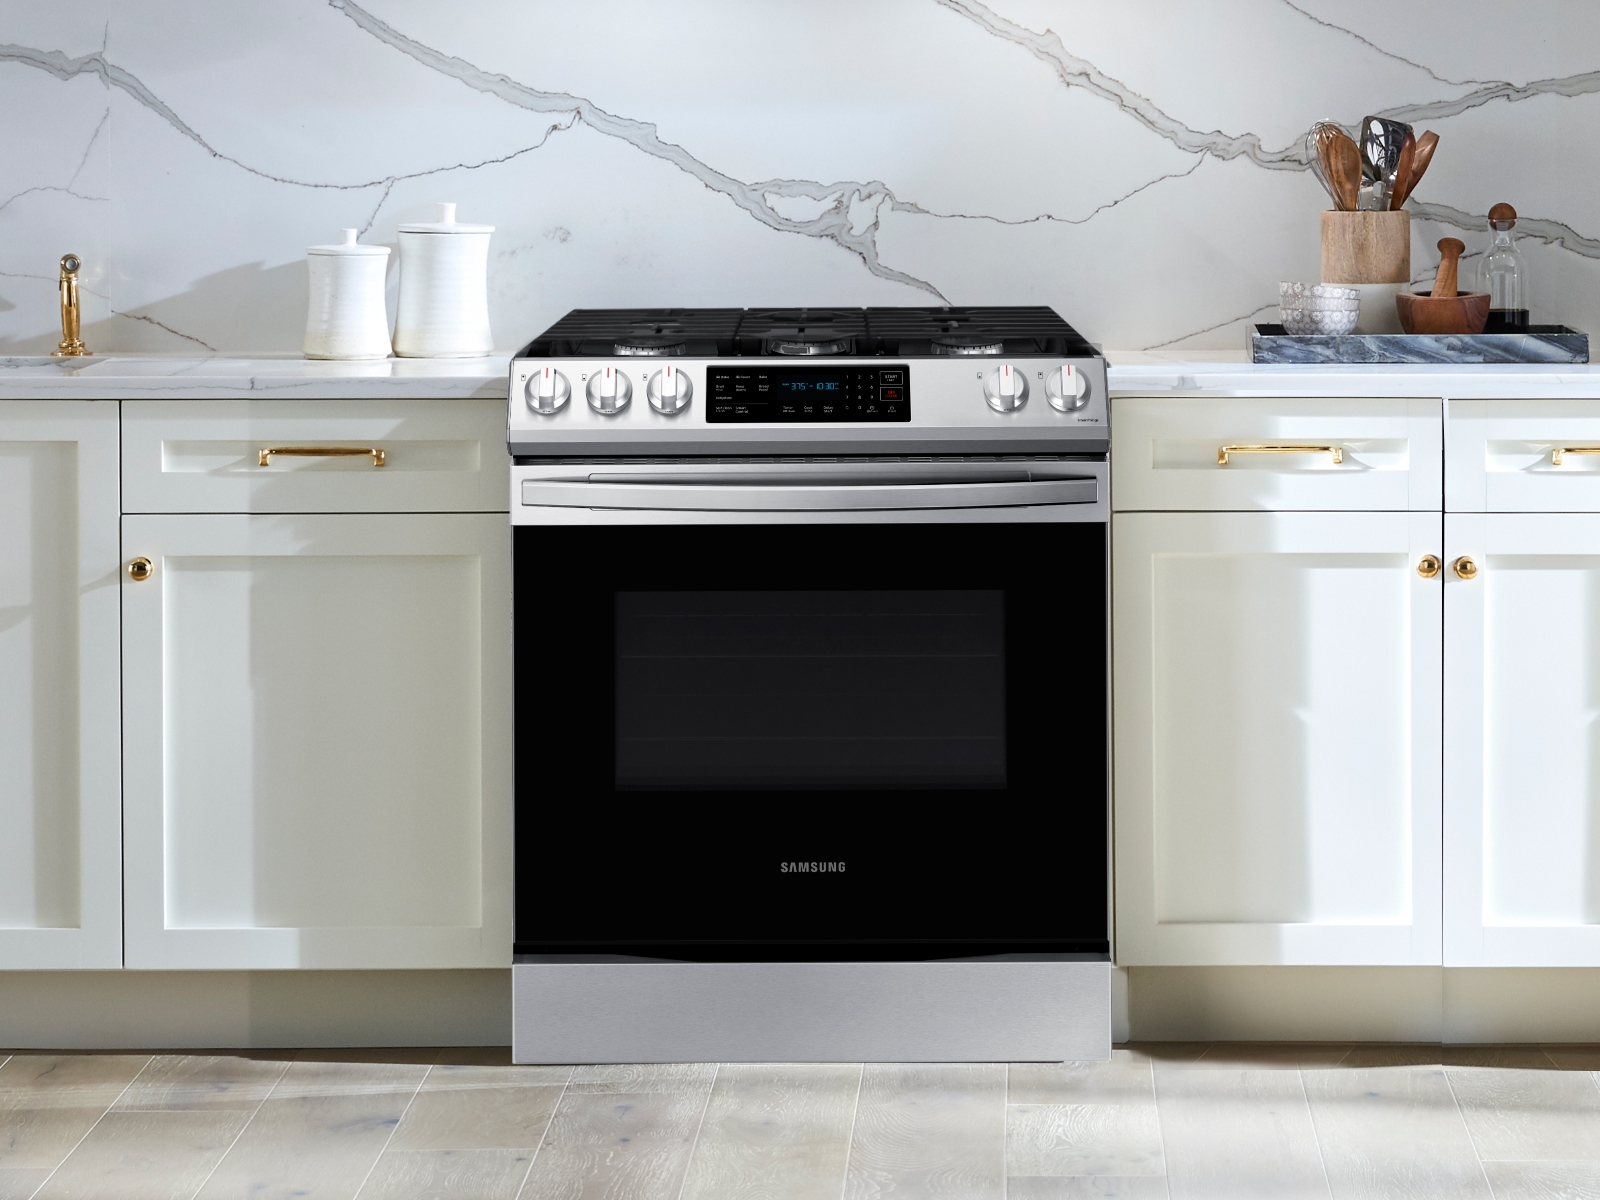 Samsung 30 in. 6.0 cu. ft. Smart Oven Slide-In Gas Range with 5 Sealed  Burners - Stainless Steel